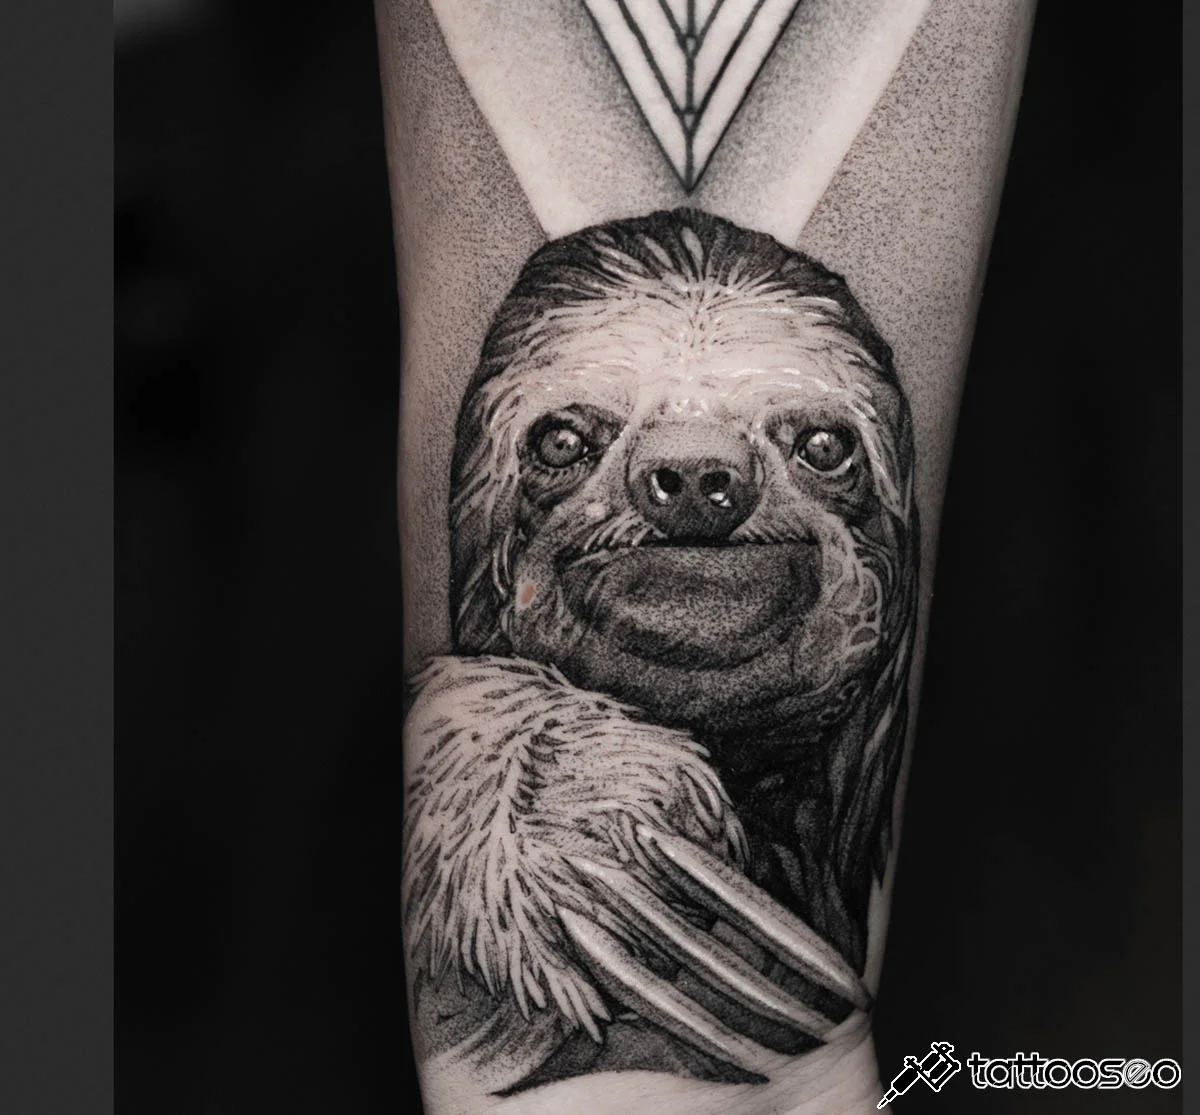 Sloth tattoo meaning